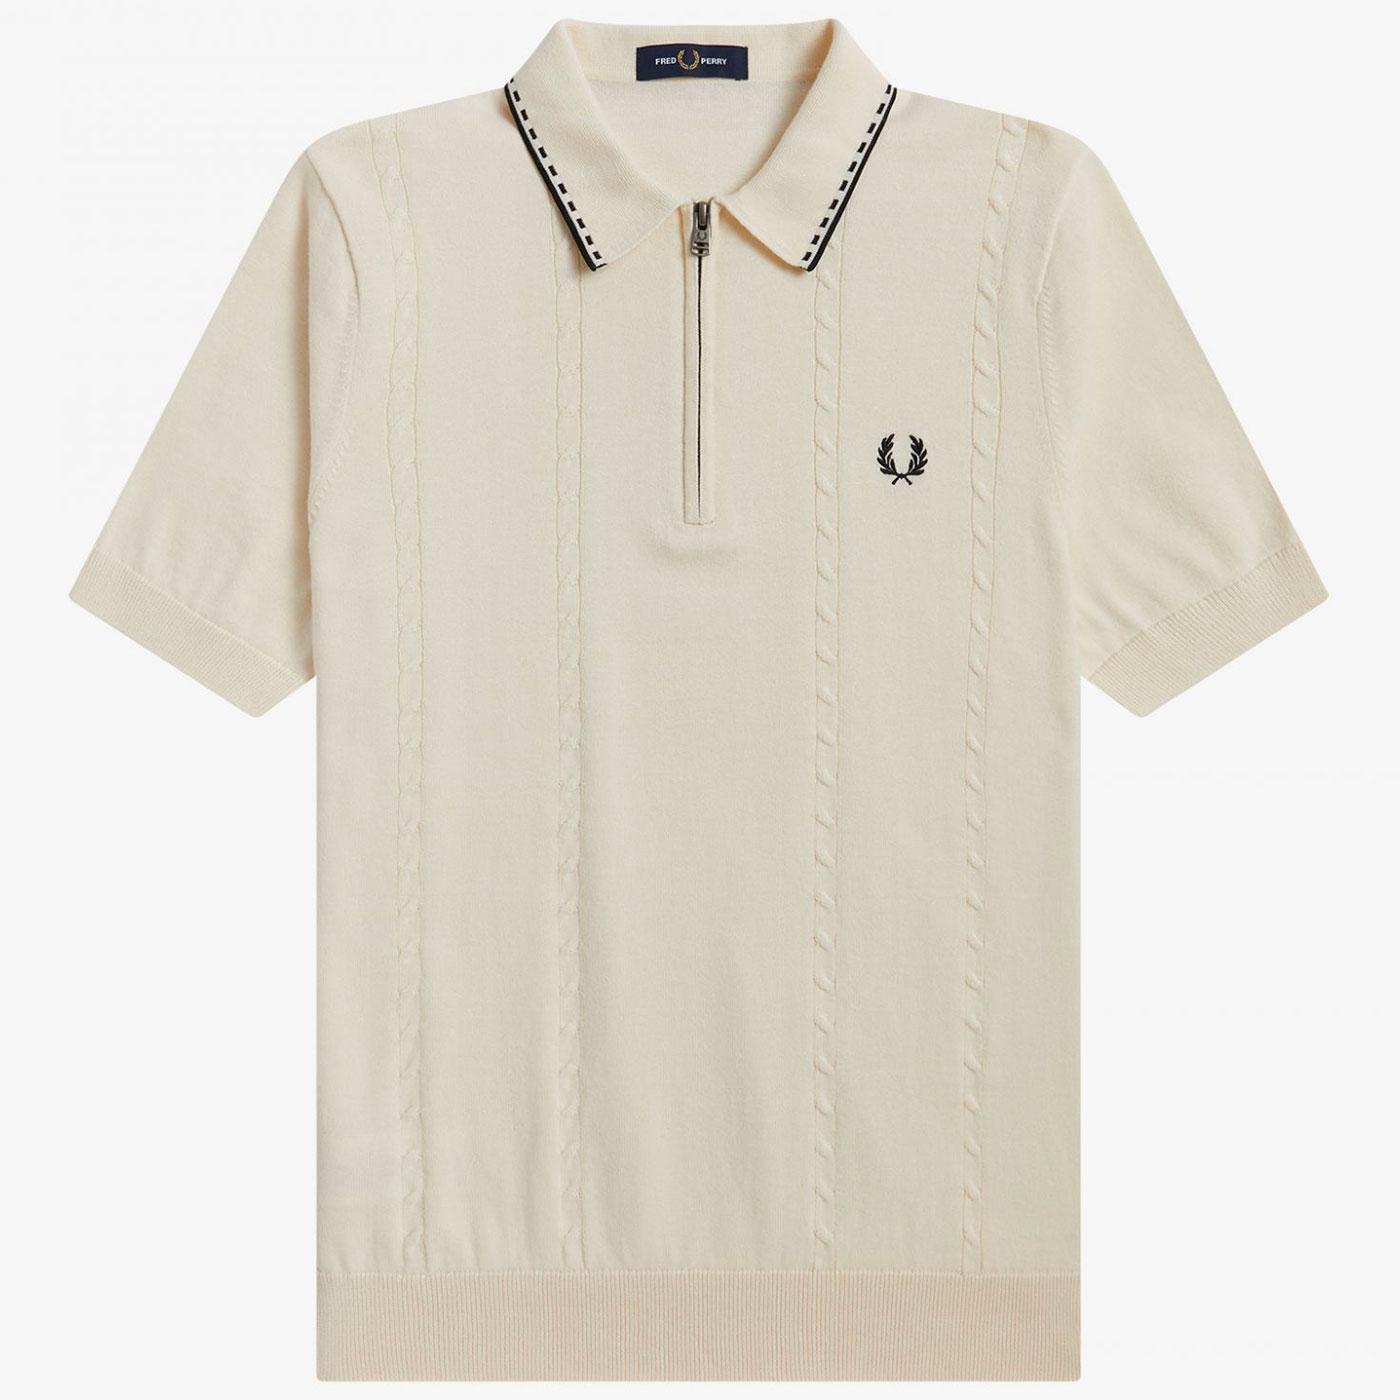 FRED PERRY Retro 70s Mod Cable Knit Zip Neck Polo